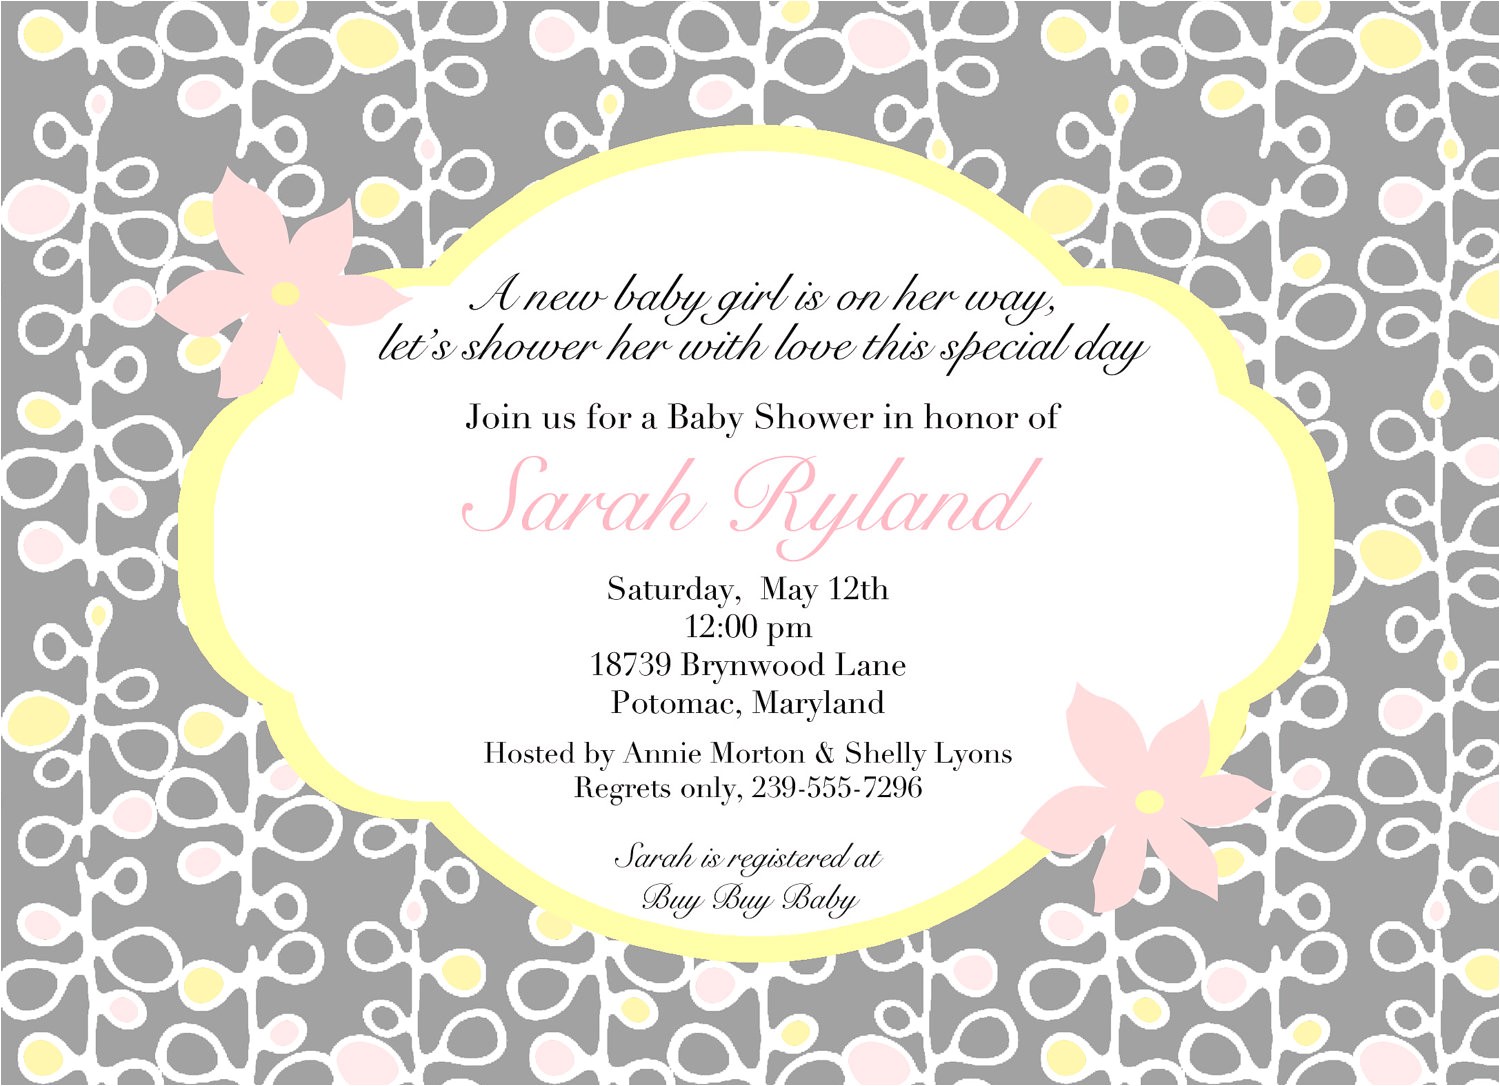 Wording On Baby Shower Invites Wording for Baby Shower Invitations asking for Gift Cards